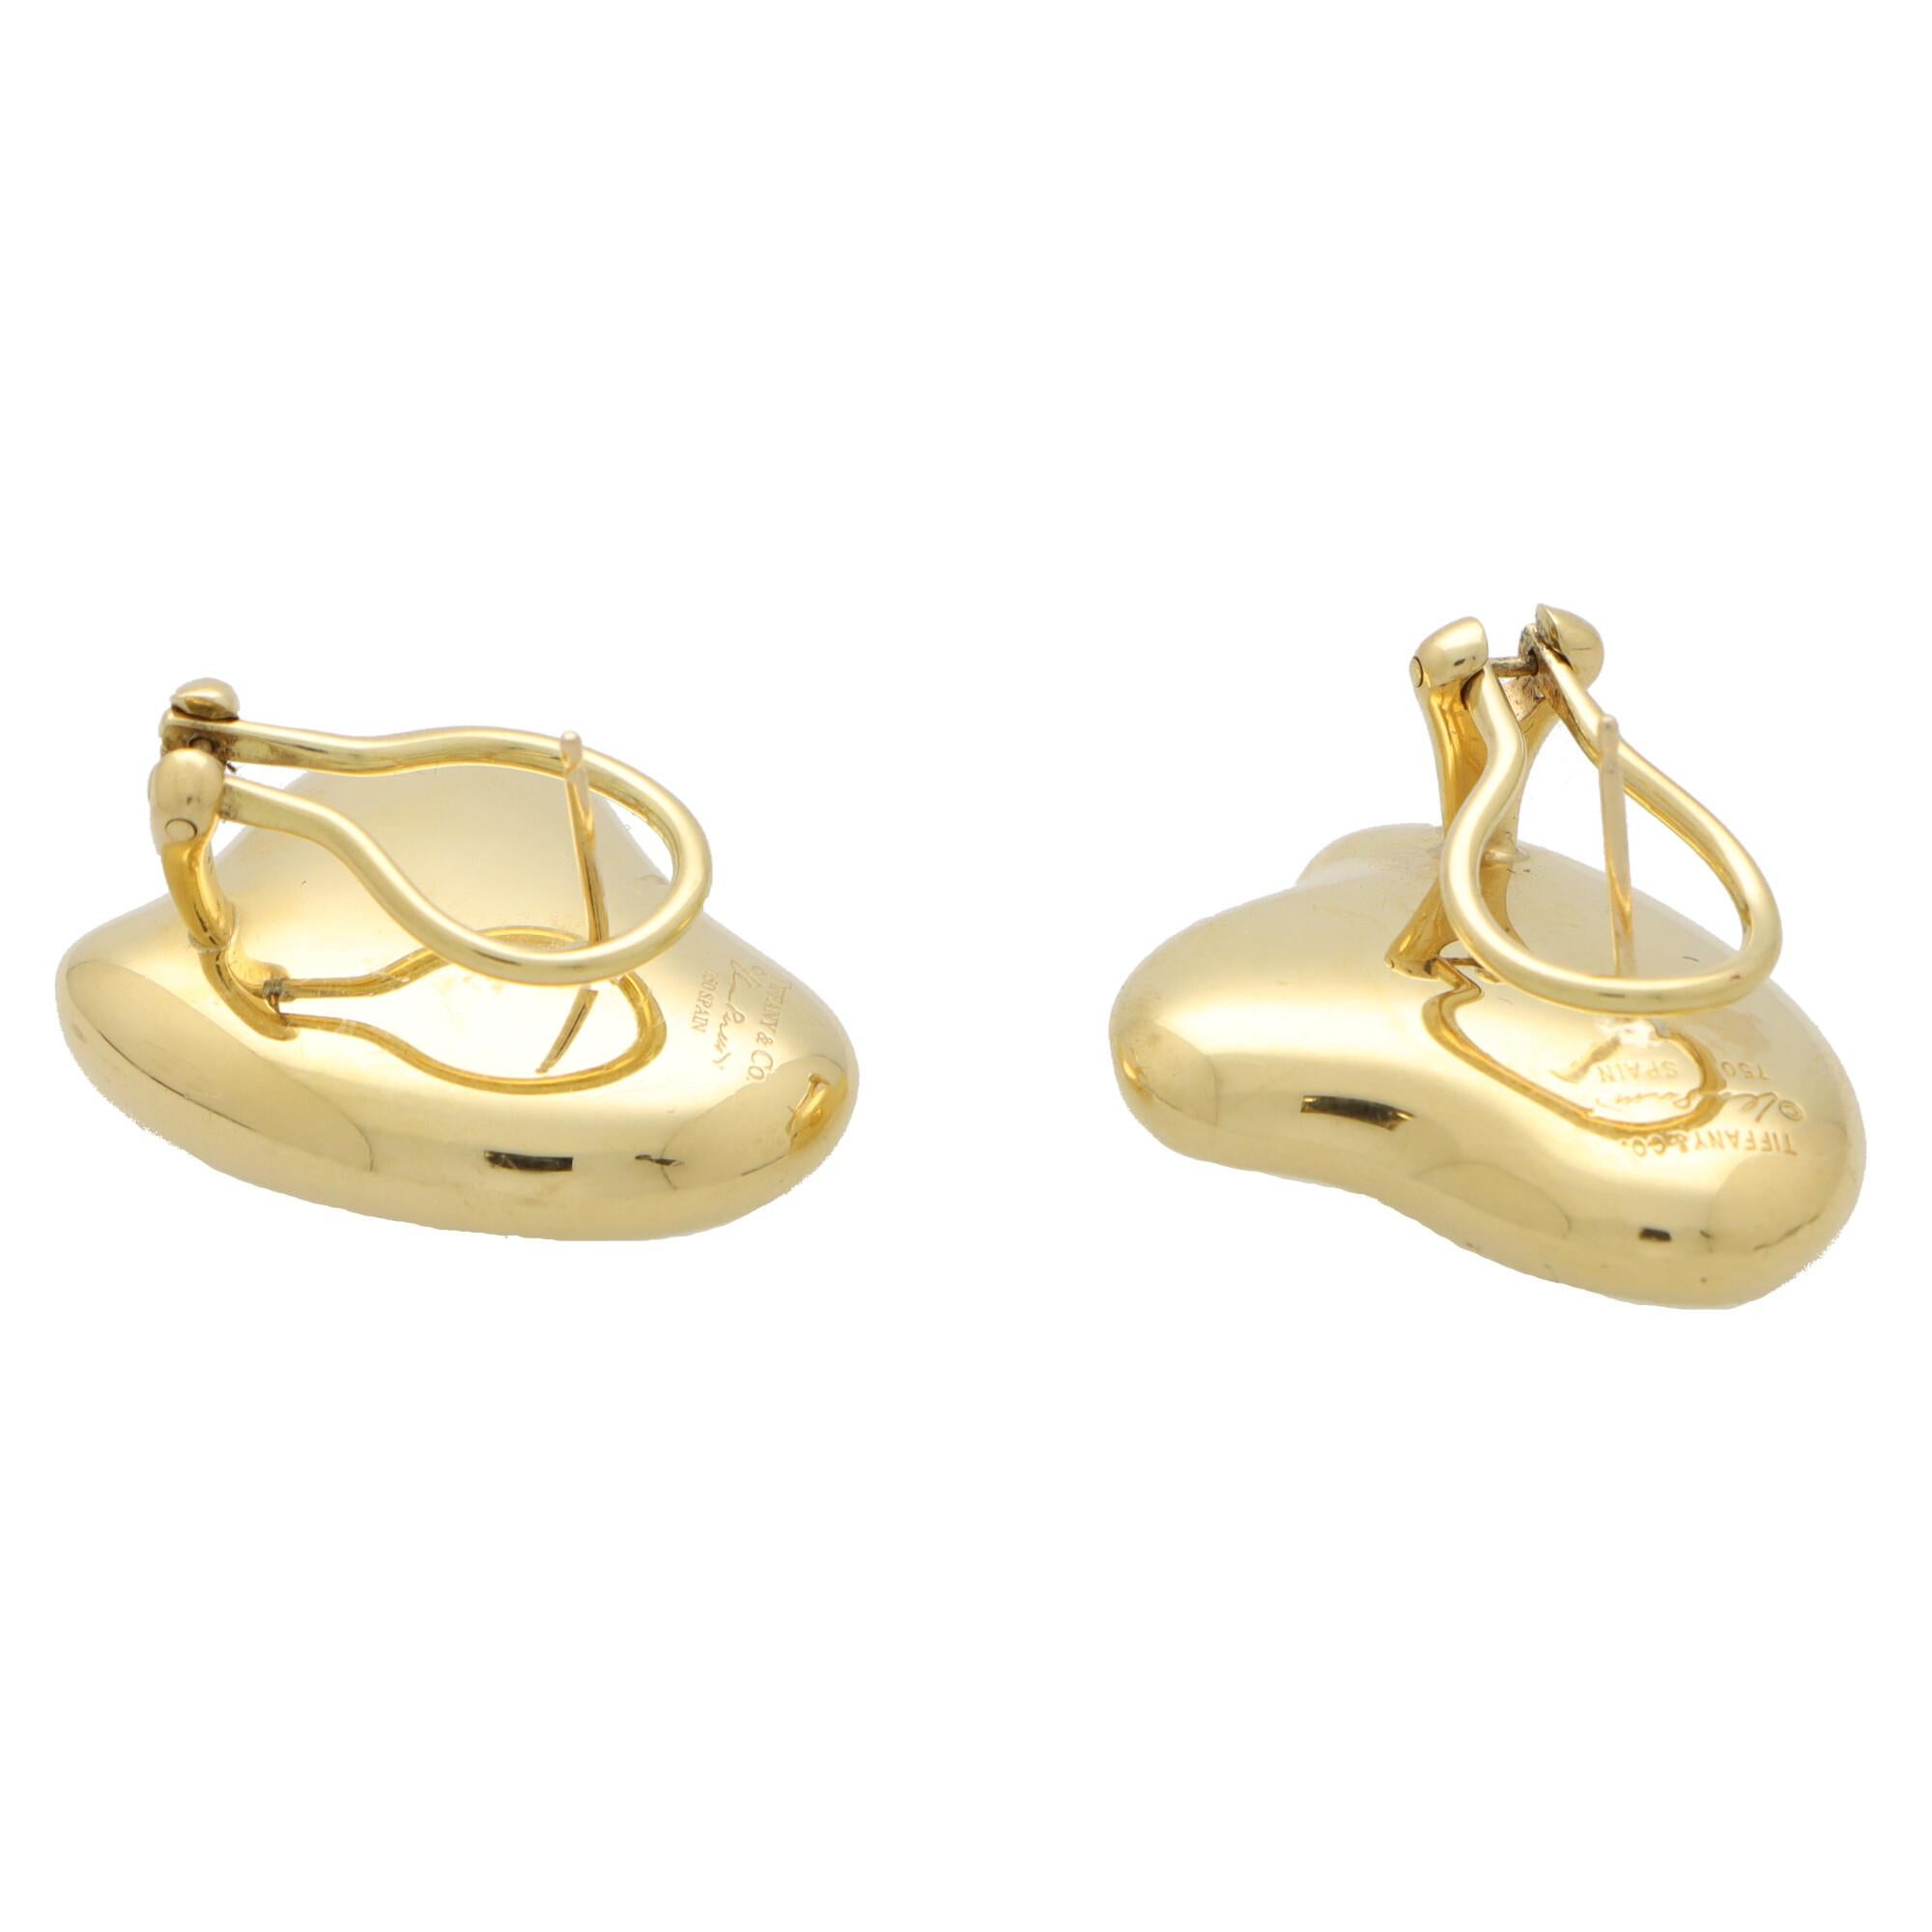 A beautiful vintage pair of Elsa Peretti for Tiffany & Co. full heart earrings set in 18k yellow gold.

Each earring is composed in the iconic Elsa Peretti full heart motif. The hearts are set in polished yellow gold which look fantastic once on the